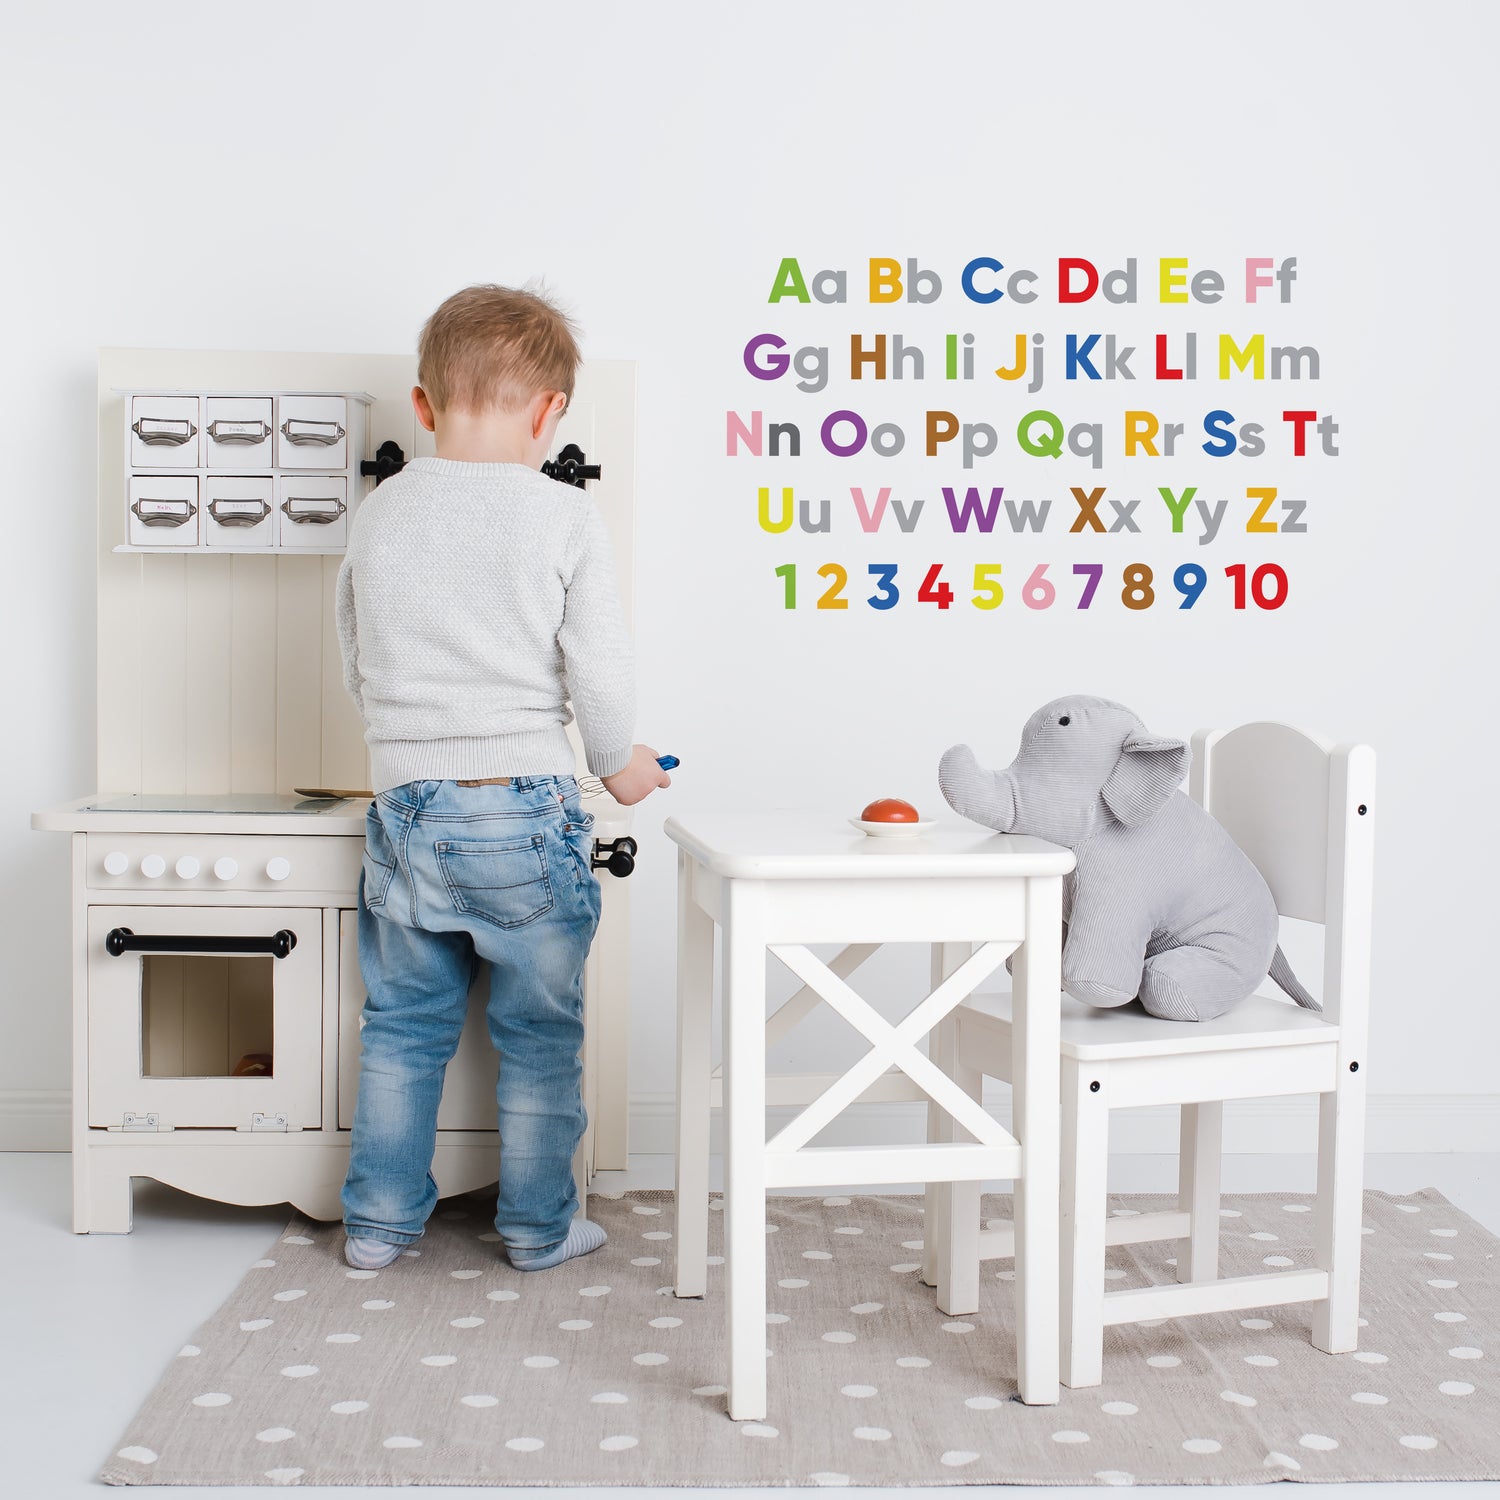 Alphabet & Numbers Wall Sticker. this sticker is the alphabet written out with both upper and lower case letters, with the numbers from 1 to 10 underneath the complete alphabet.All lower case letters in a light grey vinyl, all numbers and  upper case letters in different colours including green, orange, blue, red, yellow, pink, purple and brown.  Shown on a white wall, a children&